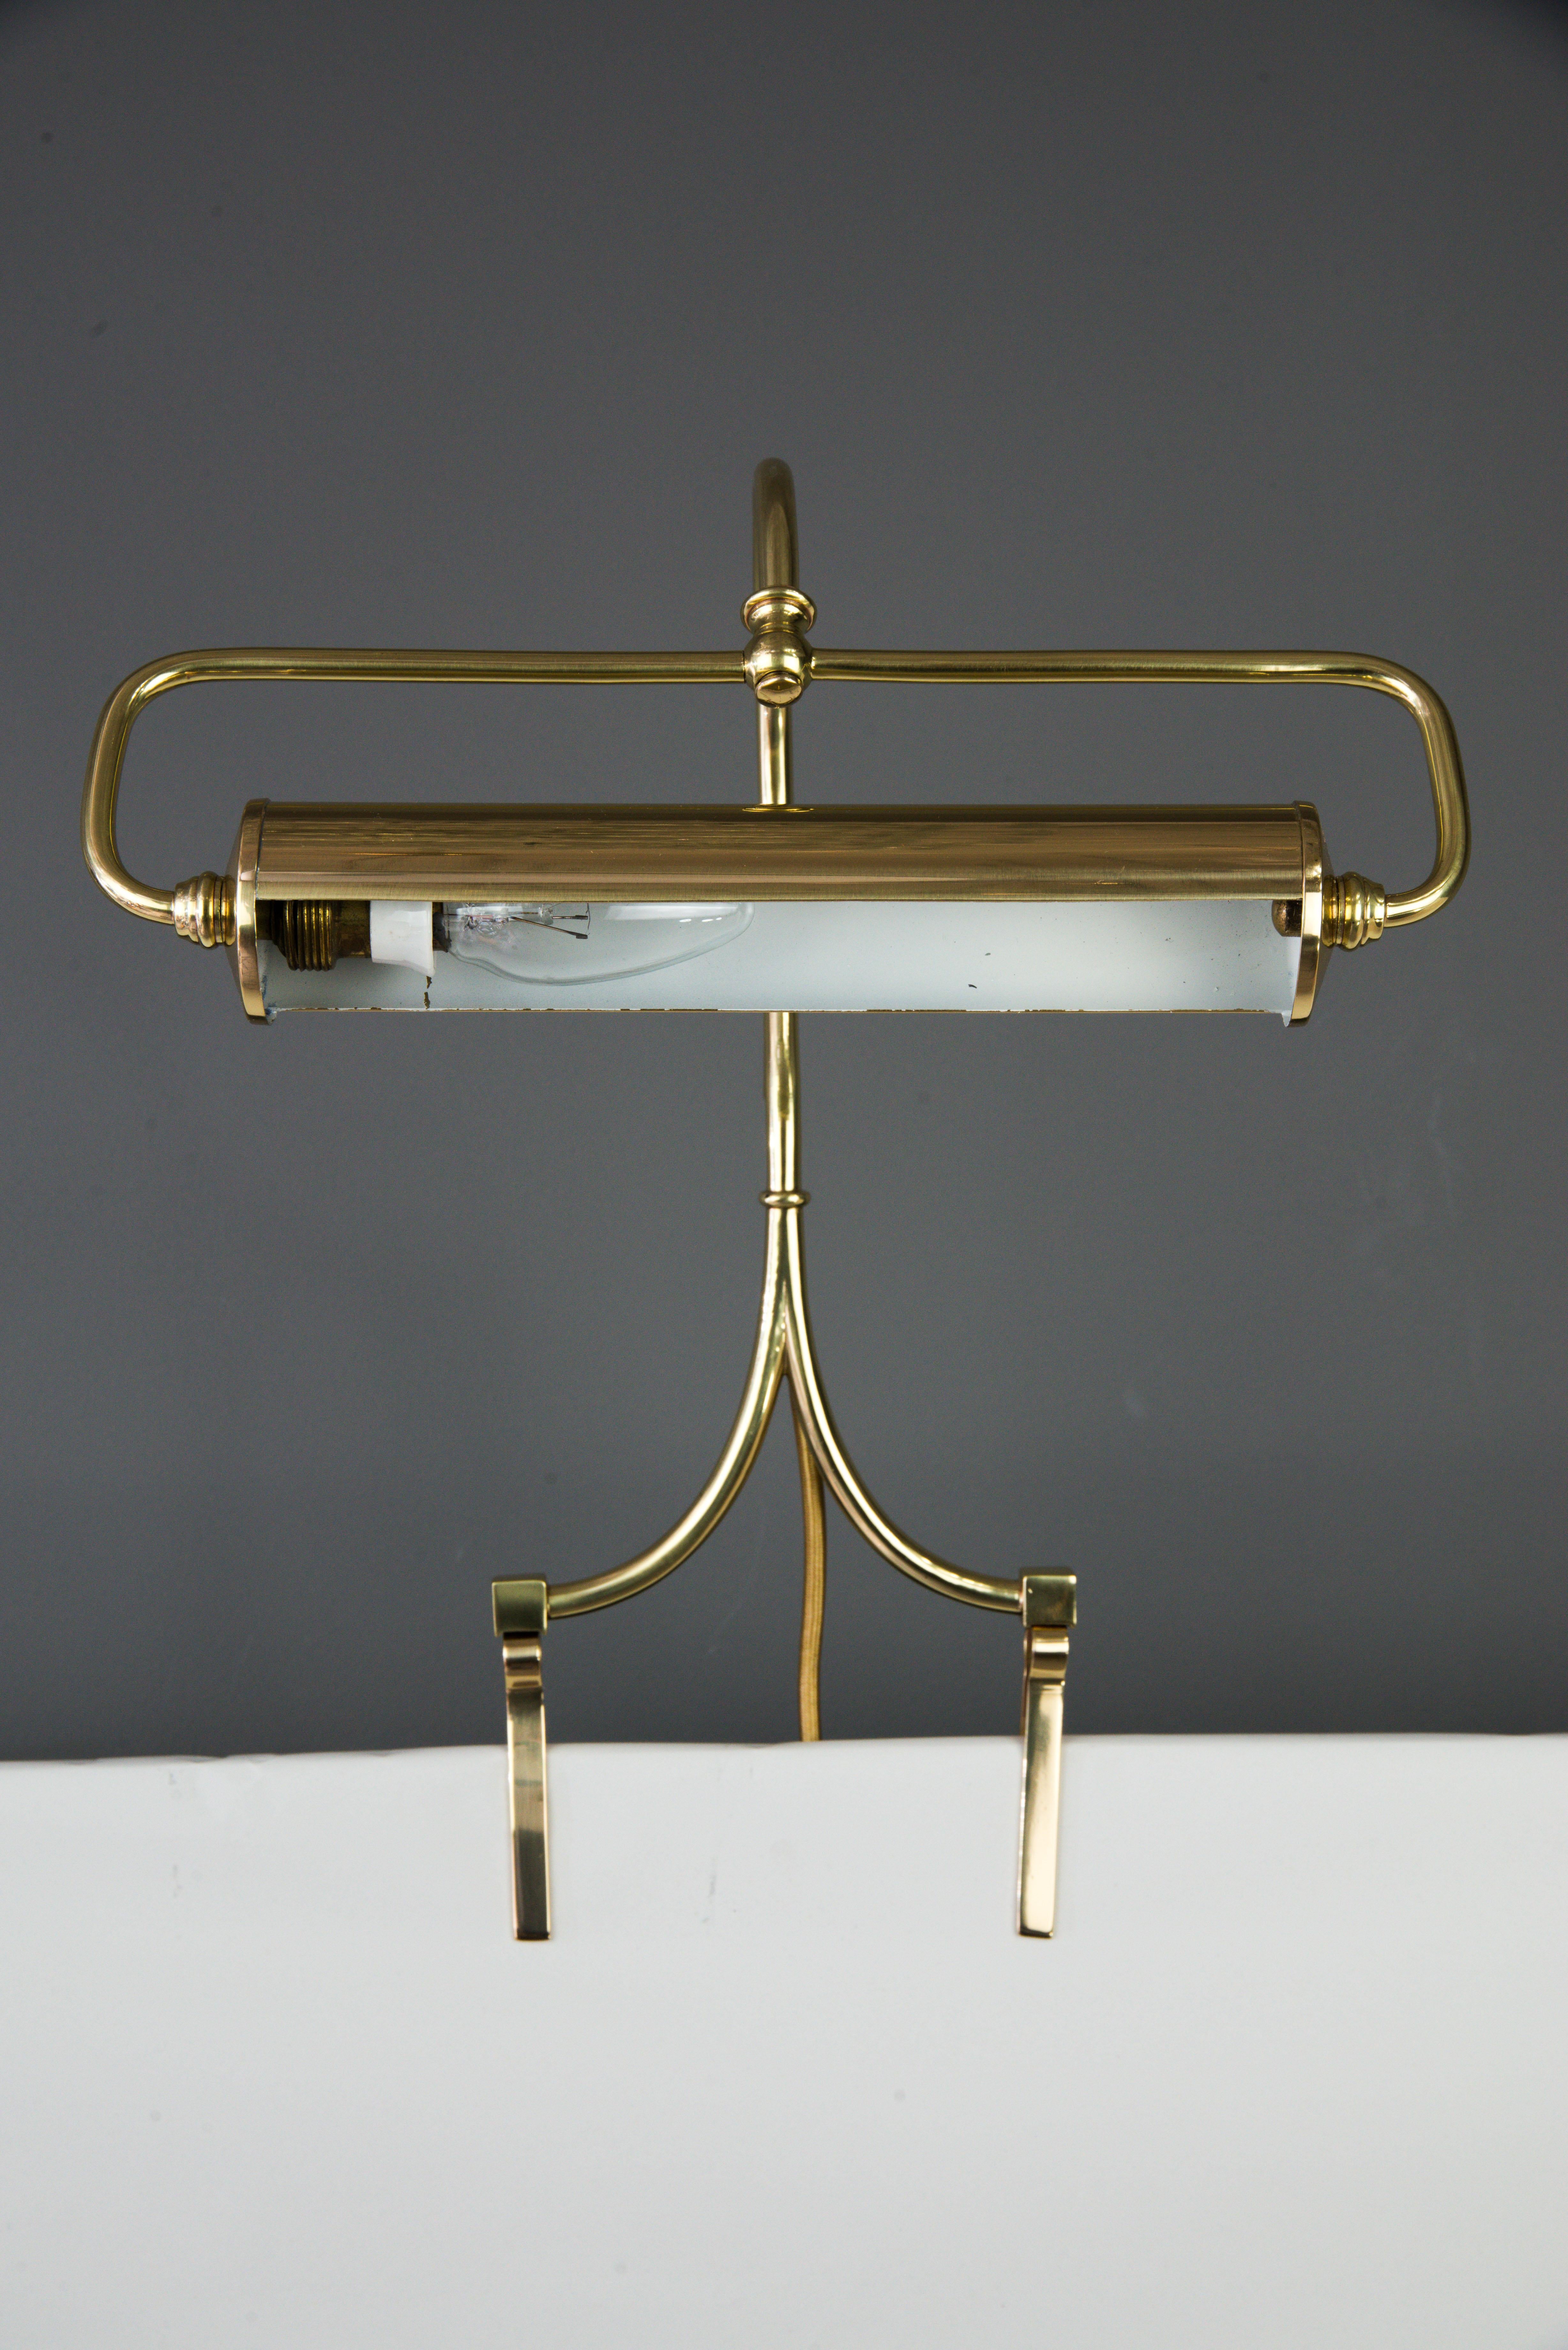 Early 20th Century Art Deco Brass Piano Note Stand Lamp, circa 1920s